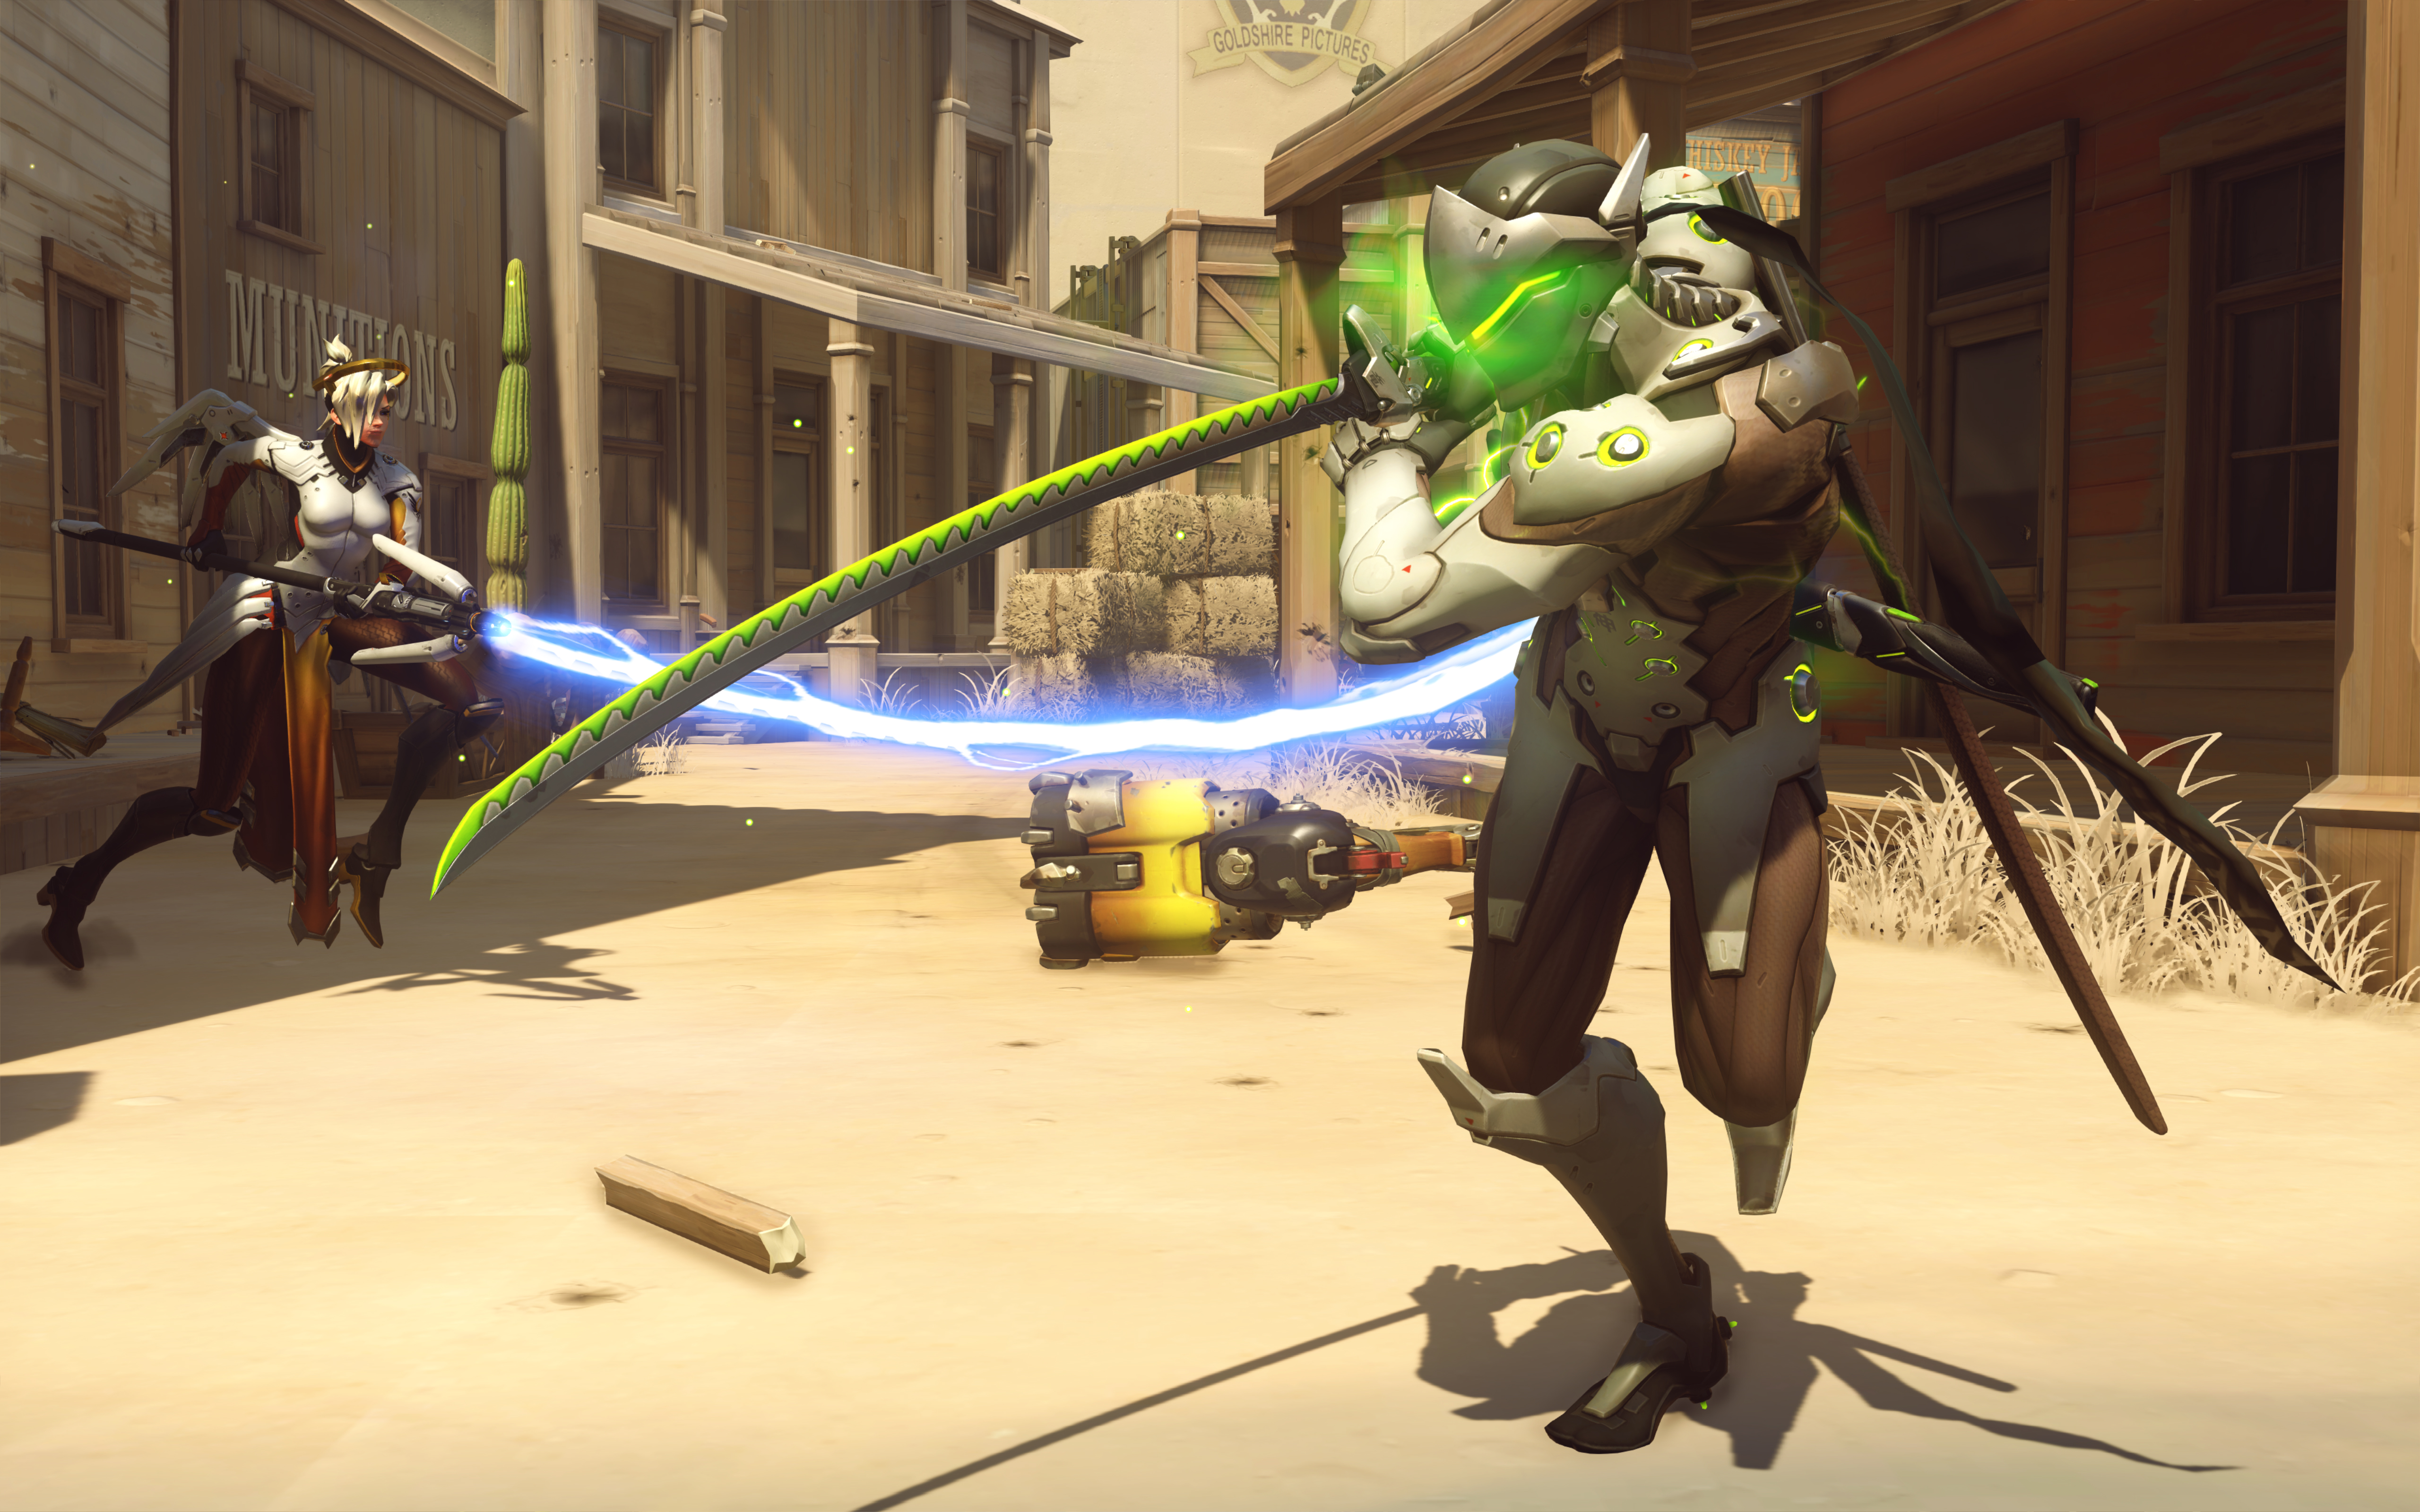 Watch out for that sword; Genji is a killer melee character.